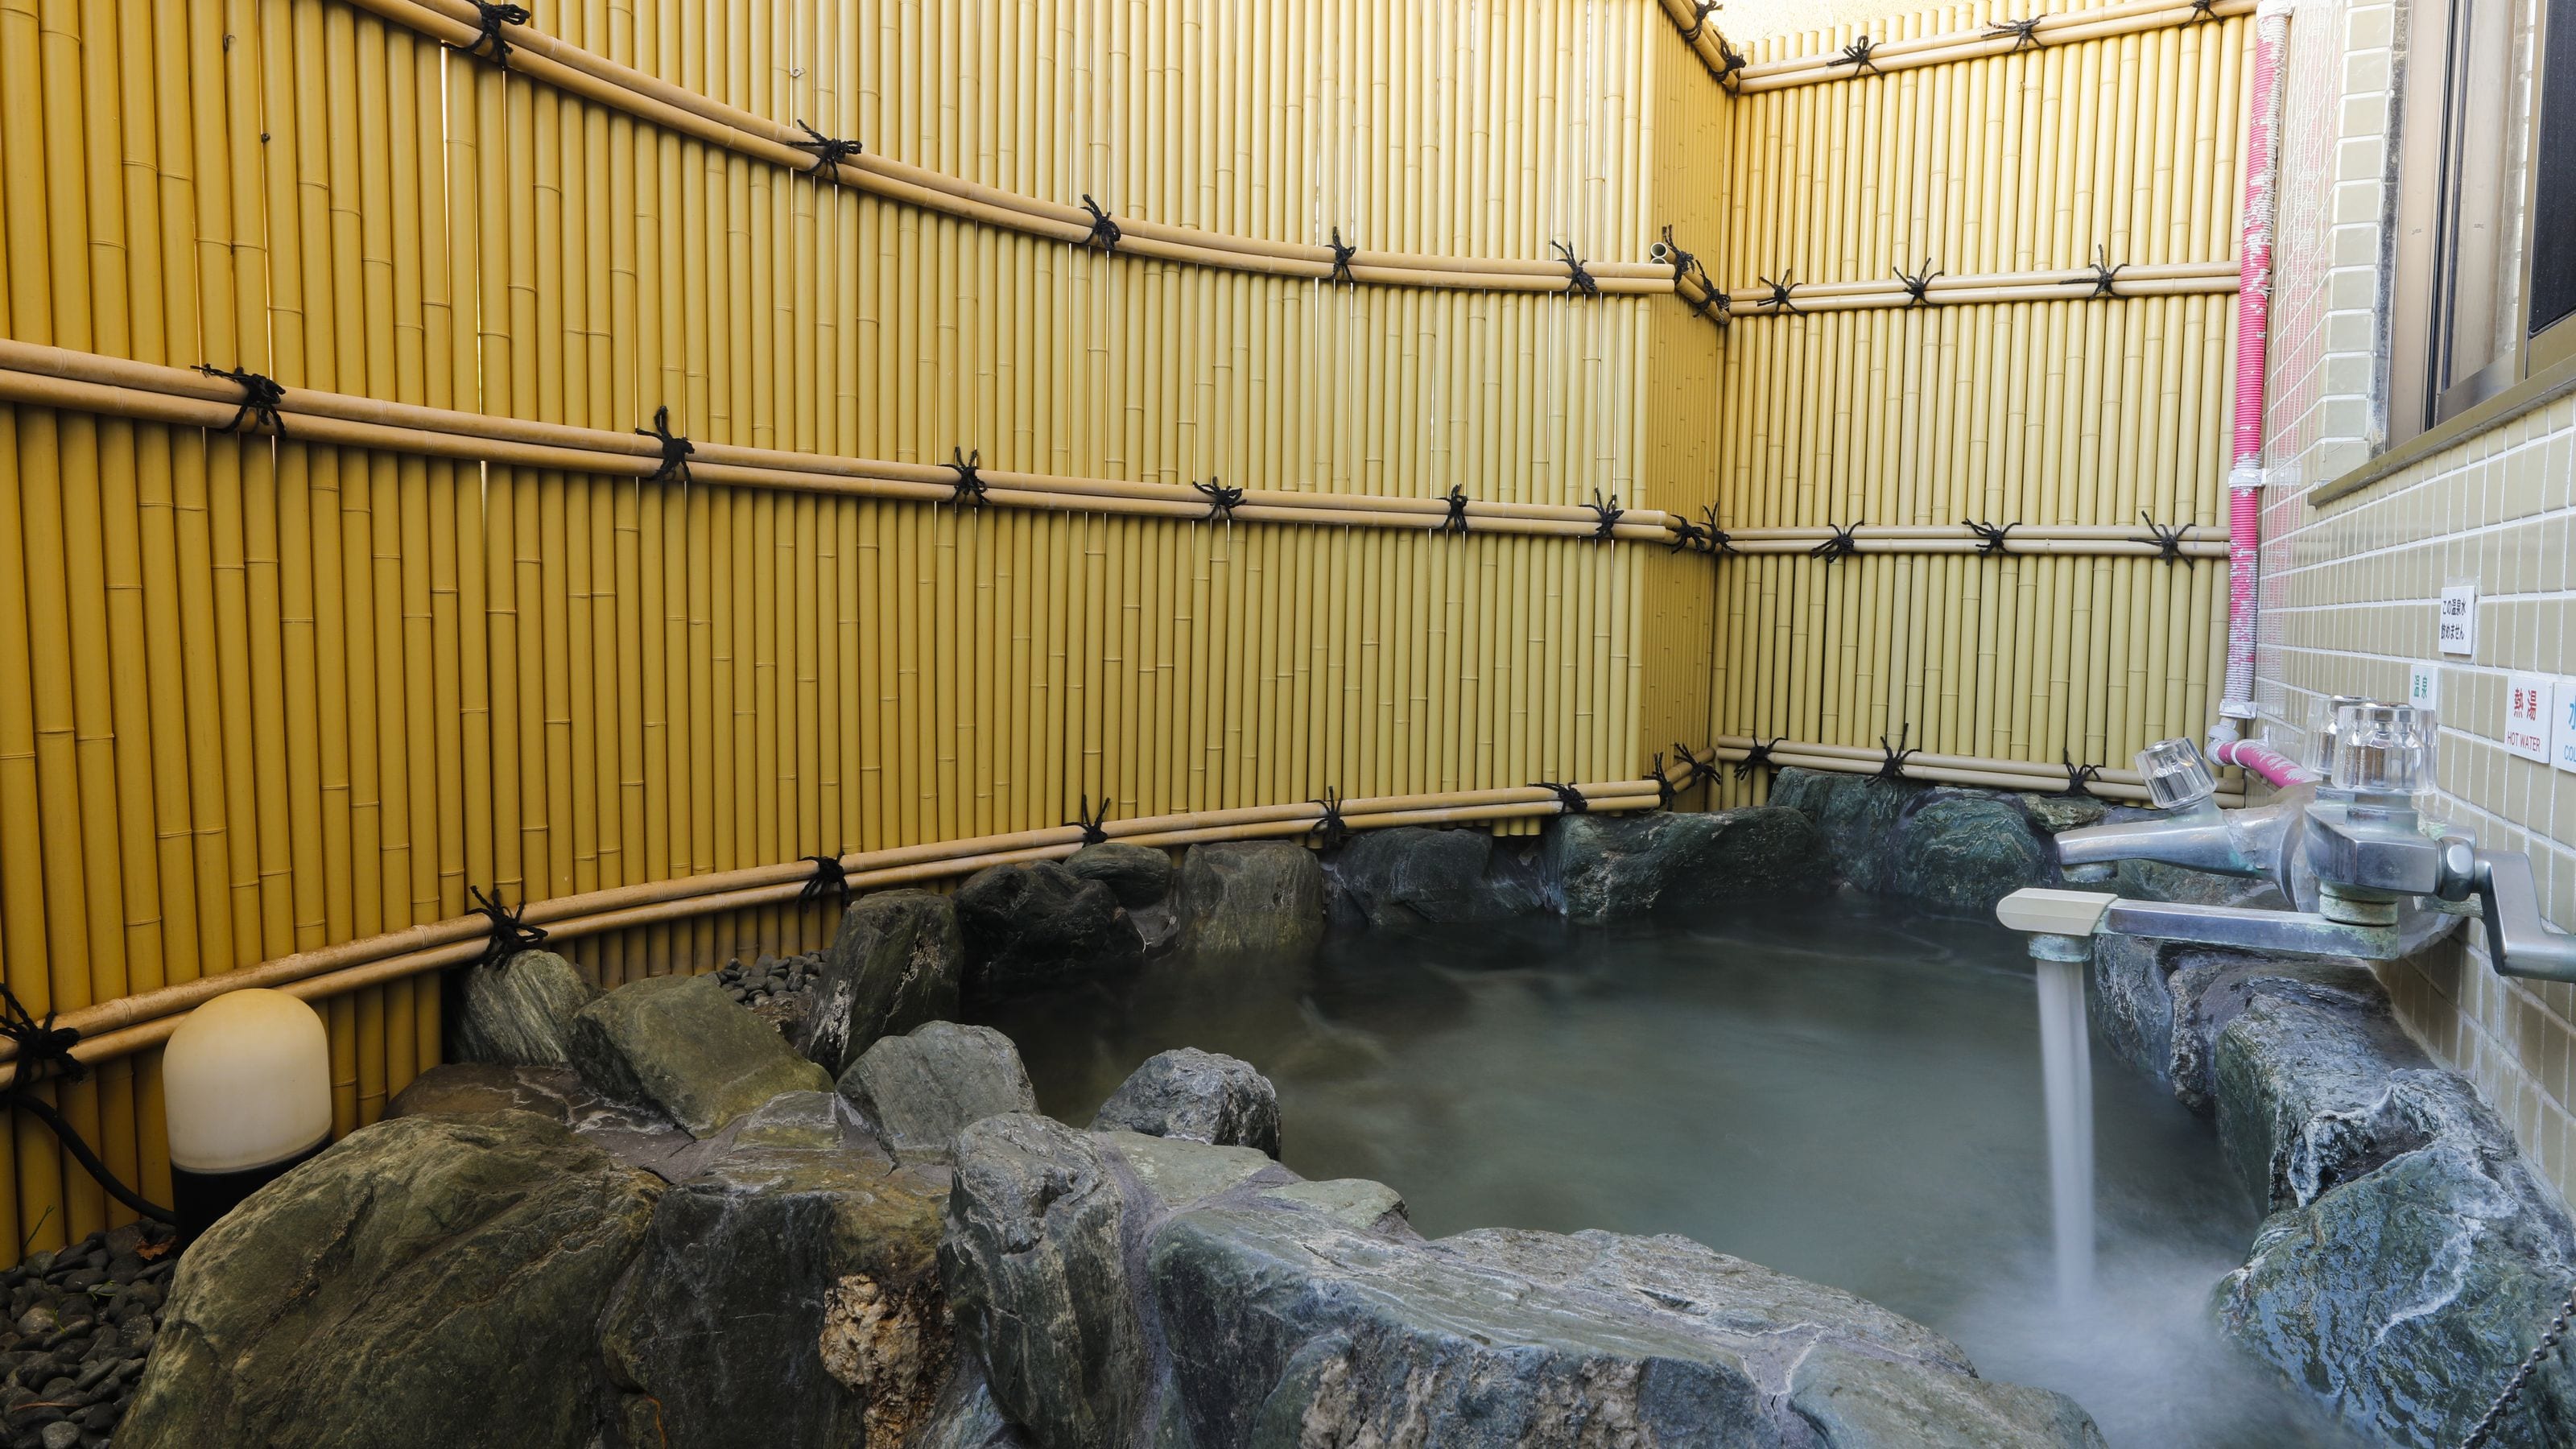 * 10th floor hot spring Hikiyu with rock bath "Hana Suite" Example: Rock bath in the suite guest room